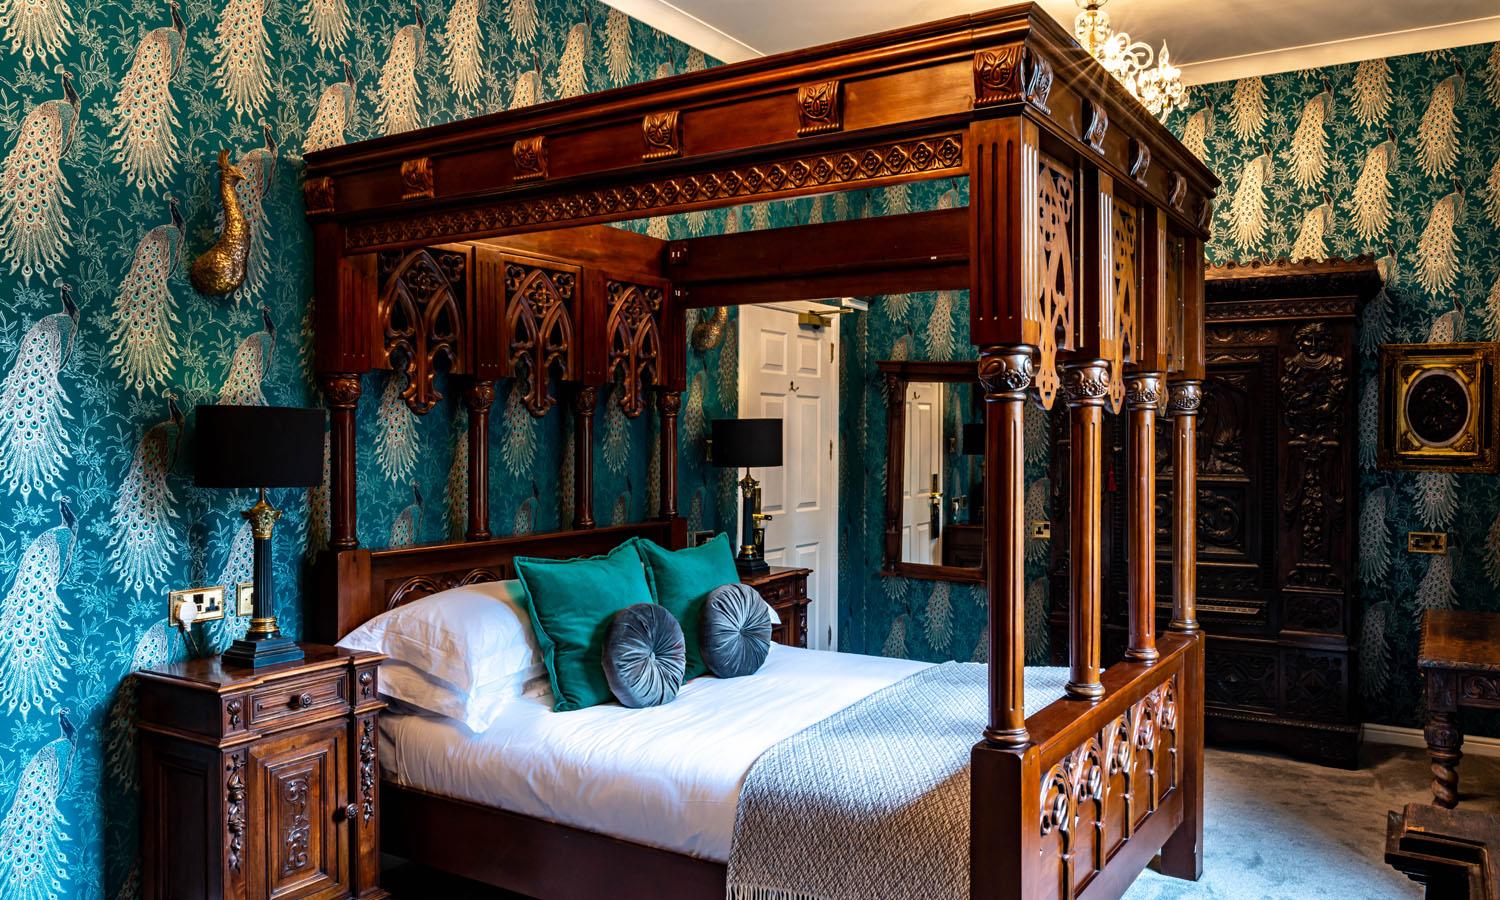 Luxury four-poster bedroom at Melville Castle